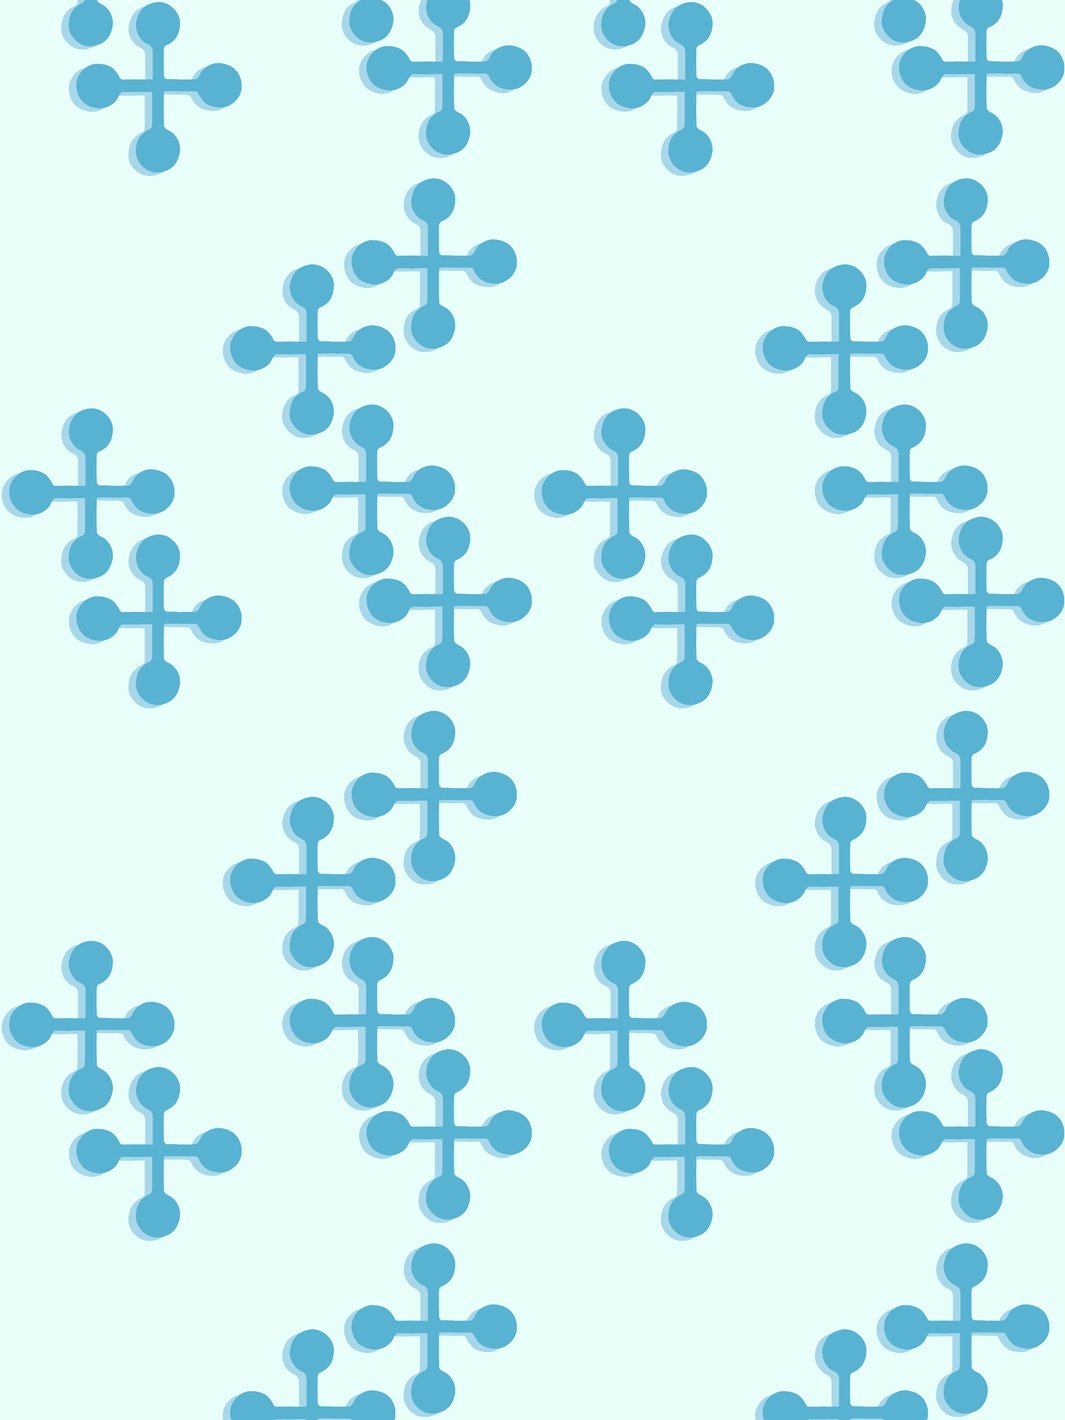 'Jacks Large Two Color' Wallpaper by Fisher-Price™ - Blue